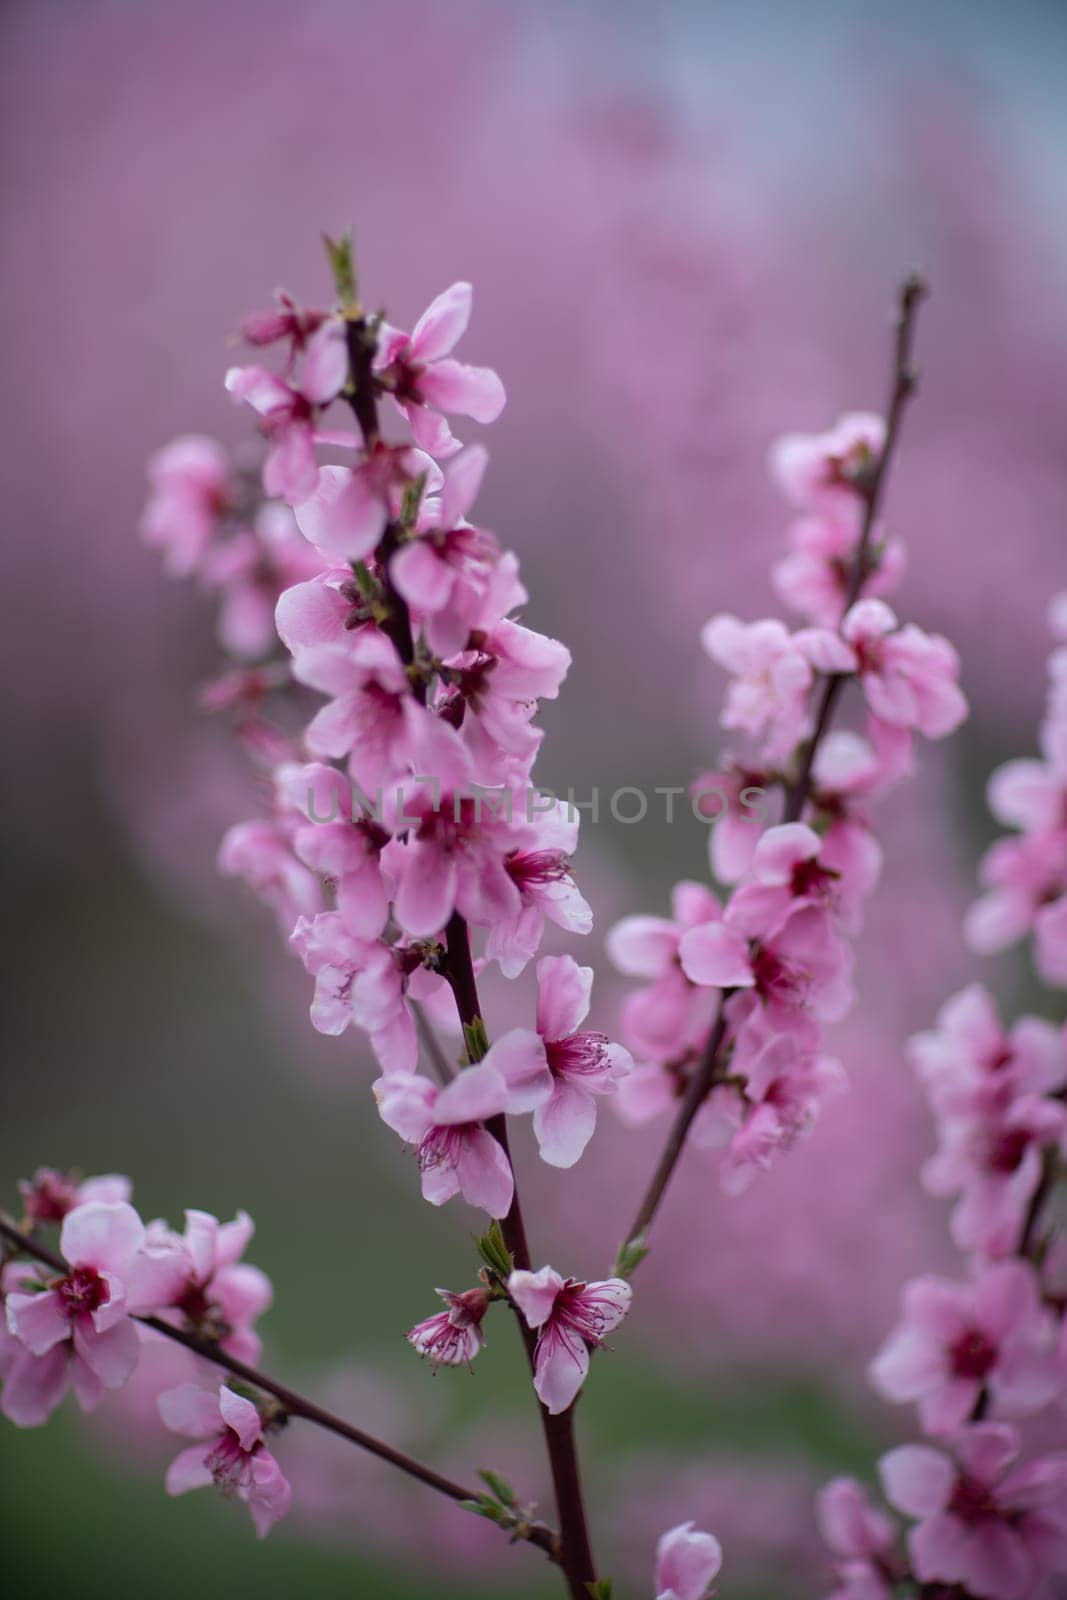 A peach blooms in the spring garden. Beautiful bright pale pink background. A flowering tree branch in selective focus. A dreamy romantic image of spring. Atmospheric natural background by Matiunina